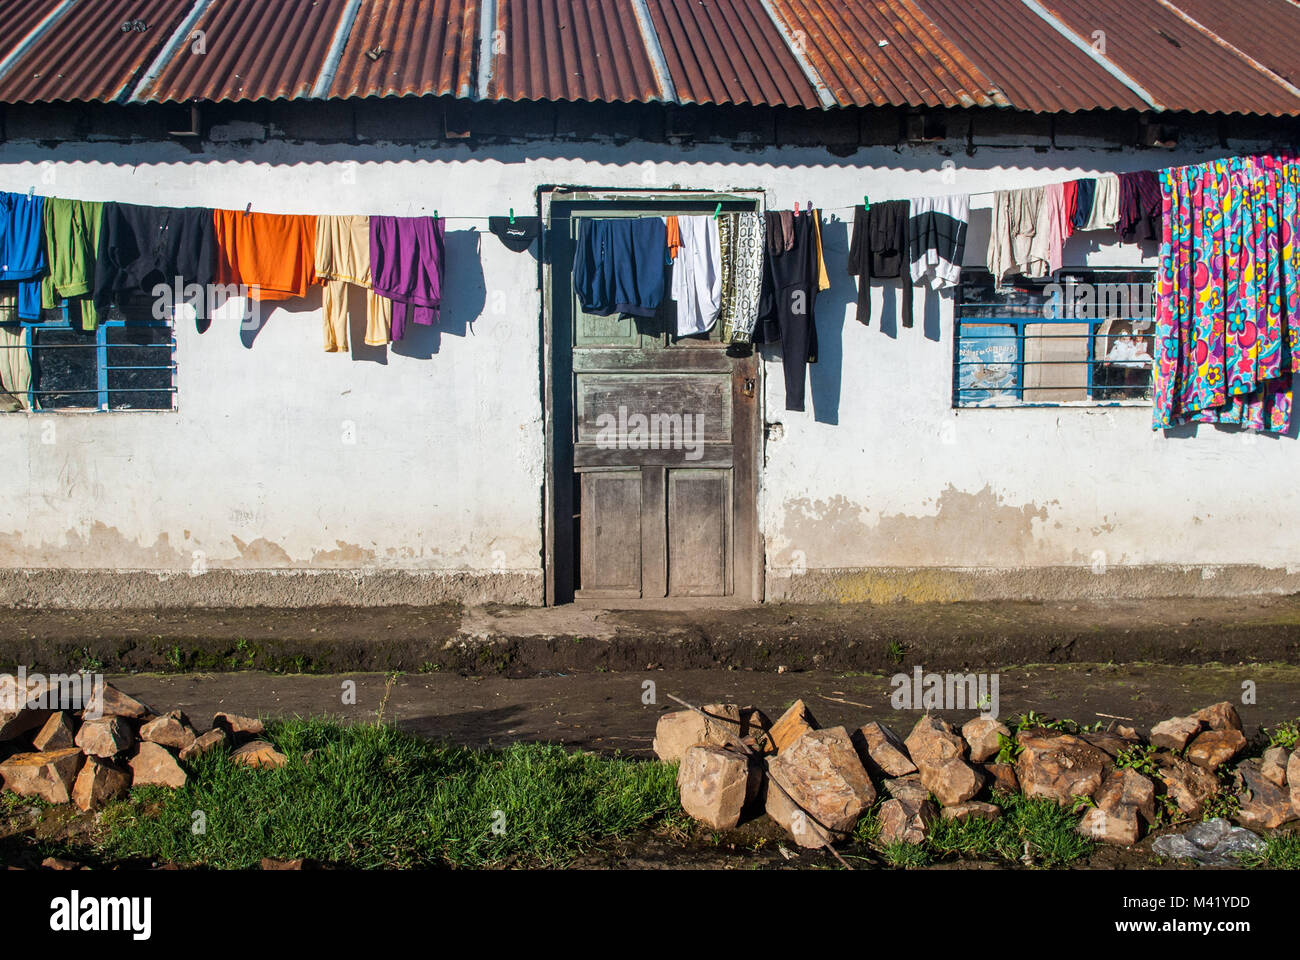 Clothes hanging out to dry in front of a rustic rural farmhouse with a corrugated iron roof Stock Photo